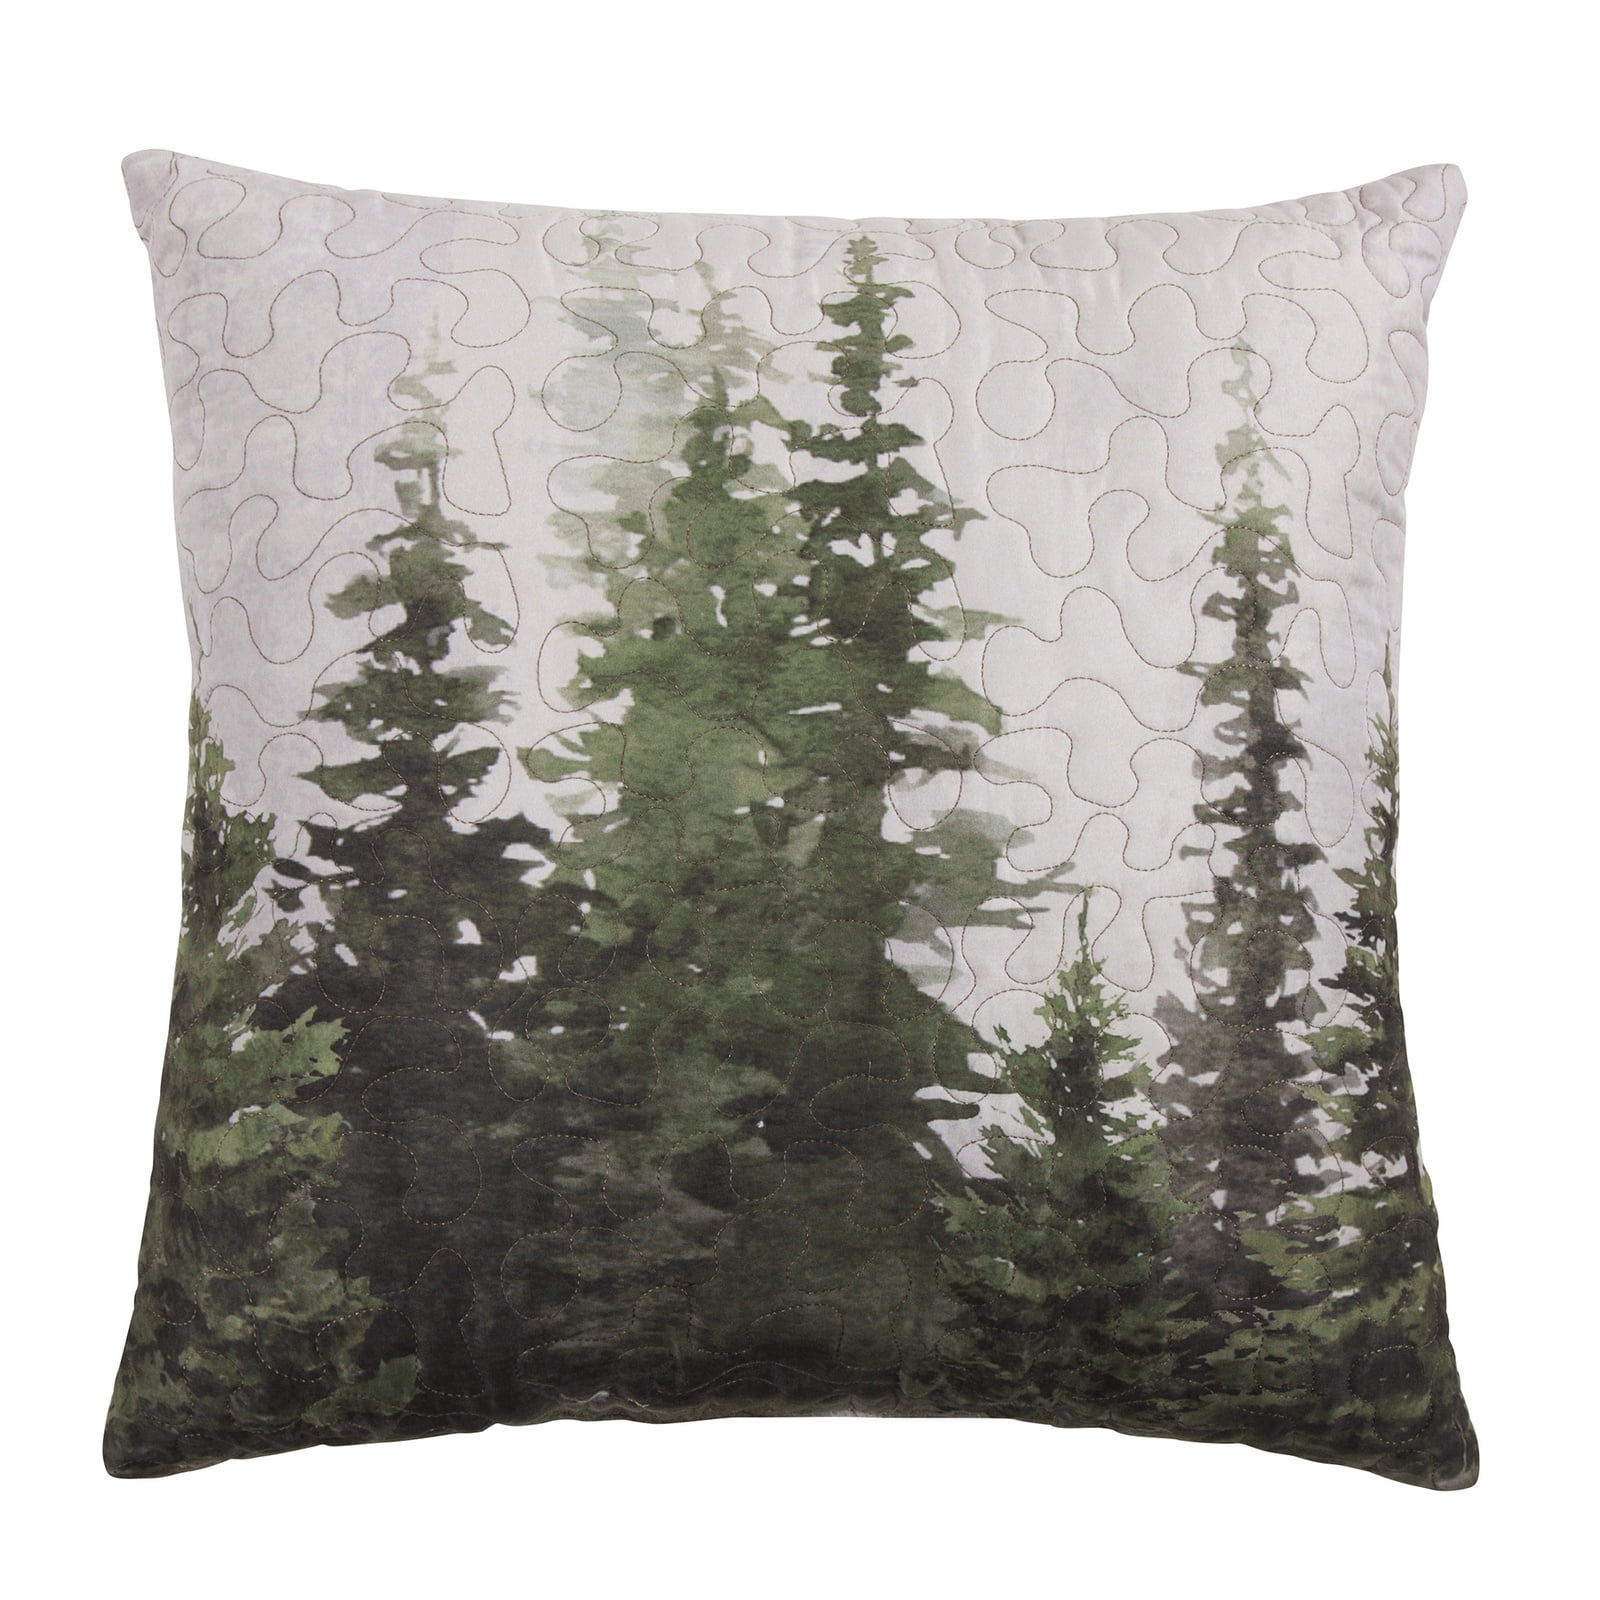 Bear Panels Lodge Decorative Throw Pillow with Tree Design Donna Sharp Throw Pillow Square